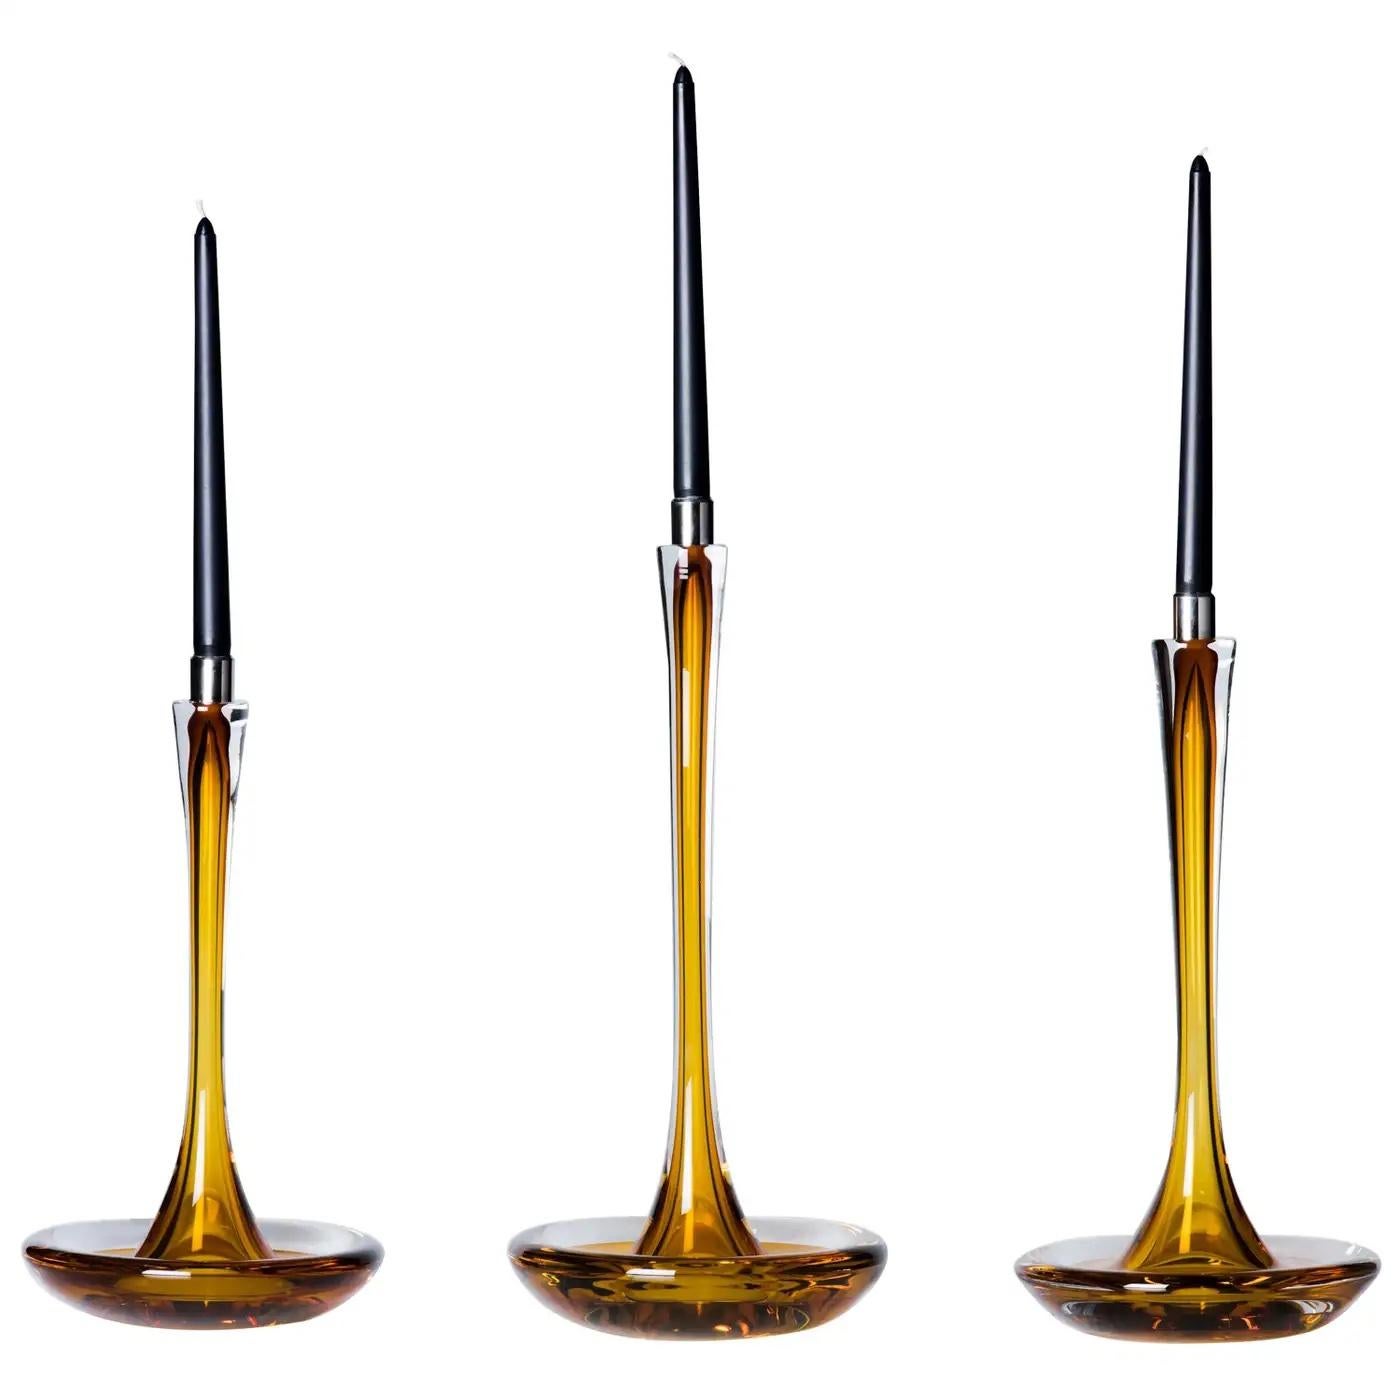 Contemporary American artist Moshe Bursuker's hand-sculpted solid set of three amber glass candleholders with a mirror finished stainless steel cup. These pieces are uniquely handcrafted to show off the nature of the material they are made from.